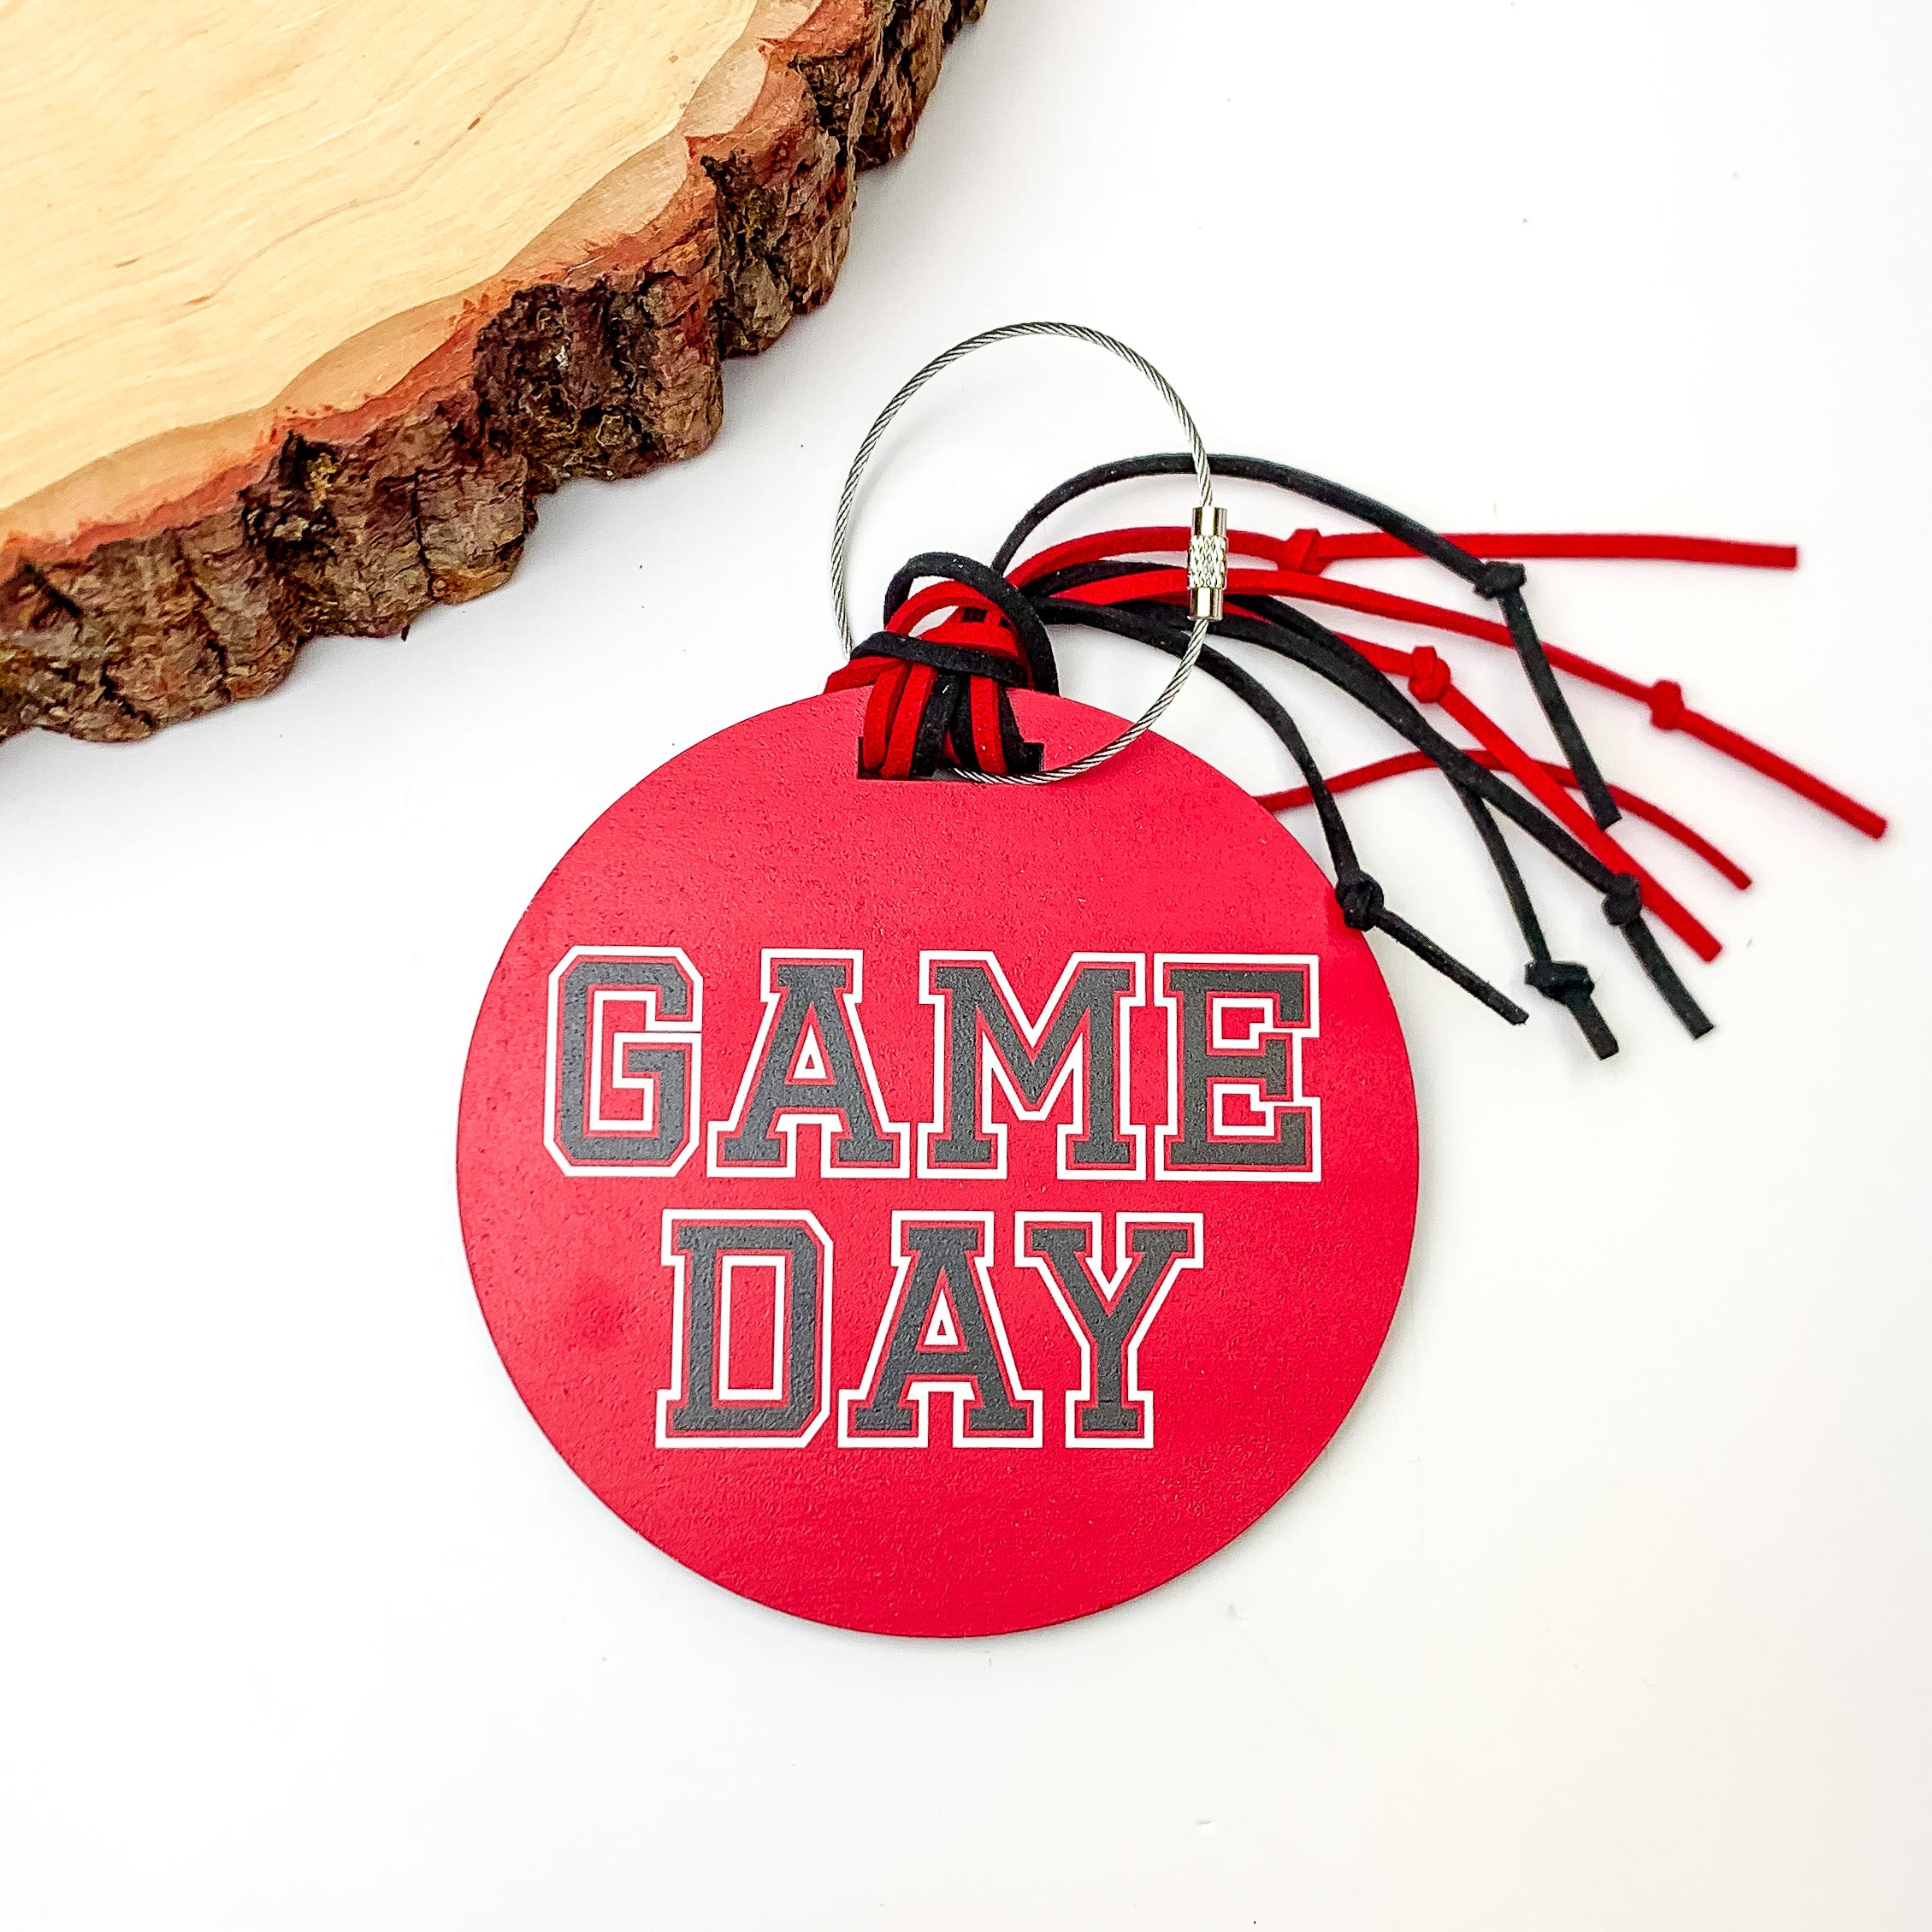 Game Day Luggage Tag in Red With Black Details. Pictured on a white background with a wood piece in the top left corner.